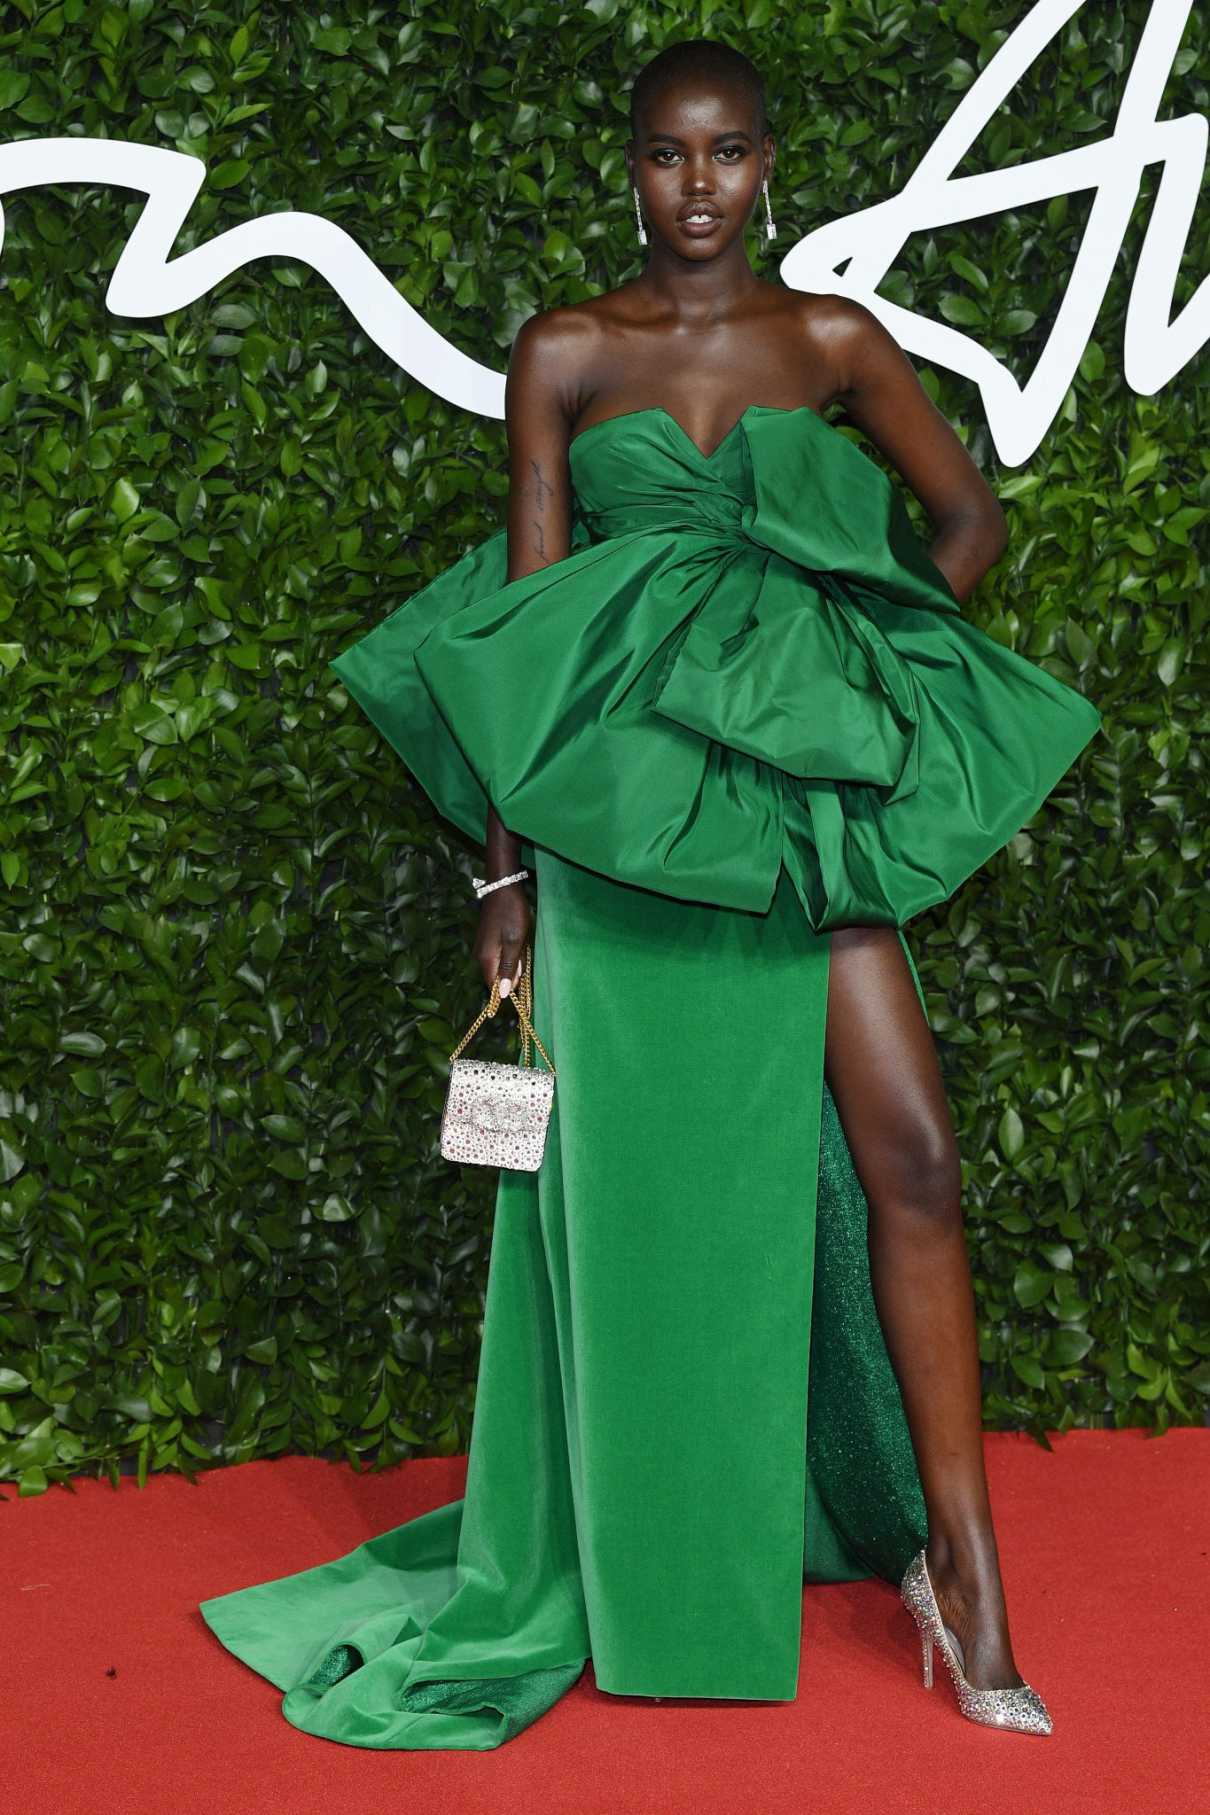 Adut Akech Attends 2019 Fashion Awards At Royal Albert Hall In London 12022019 1 Lacelebsco